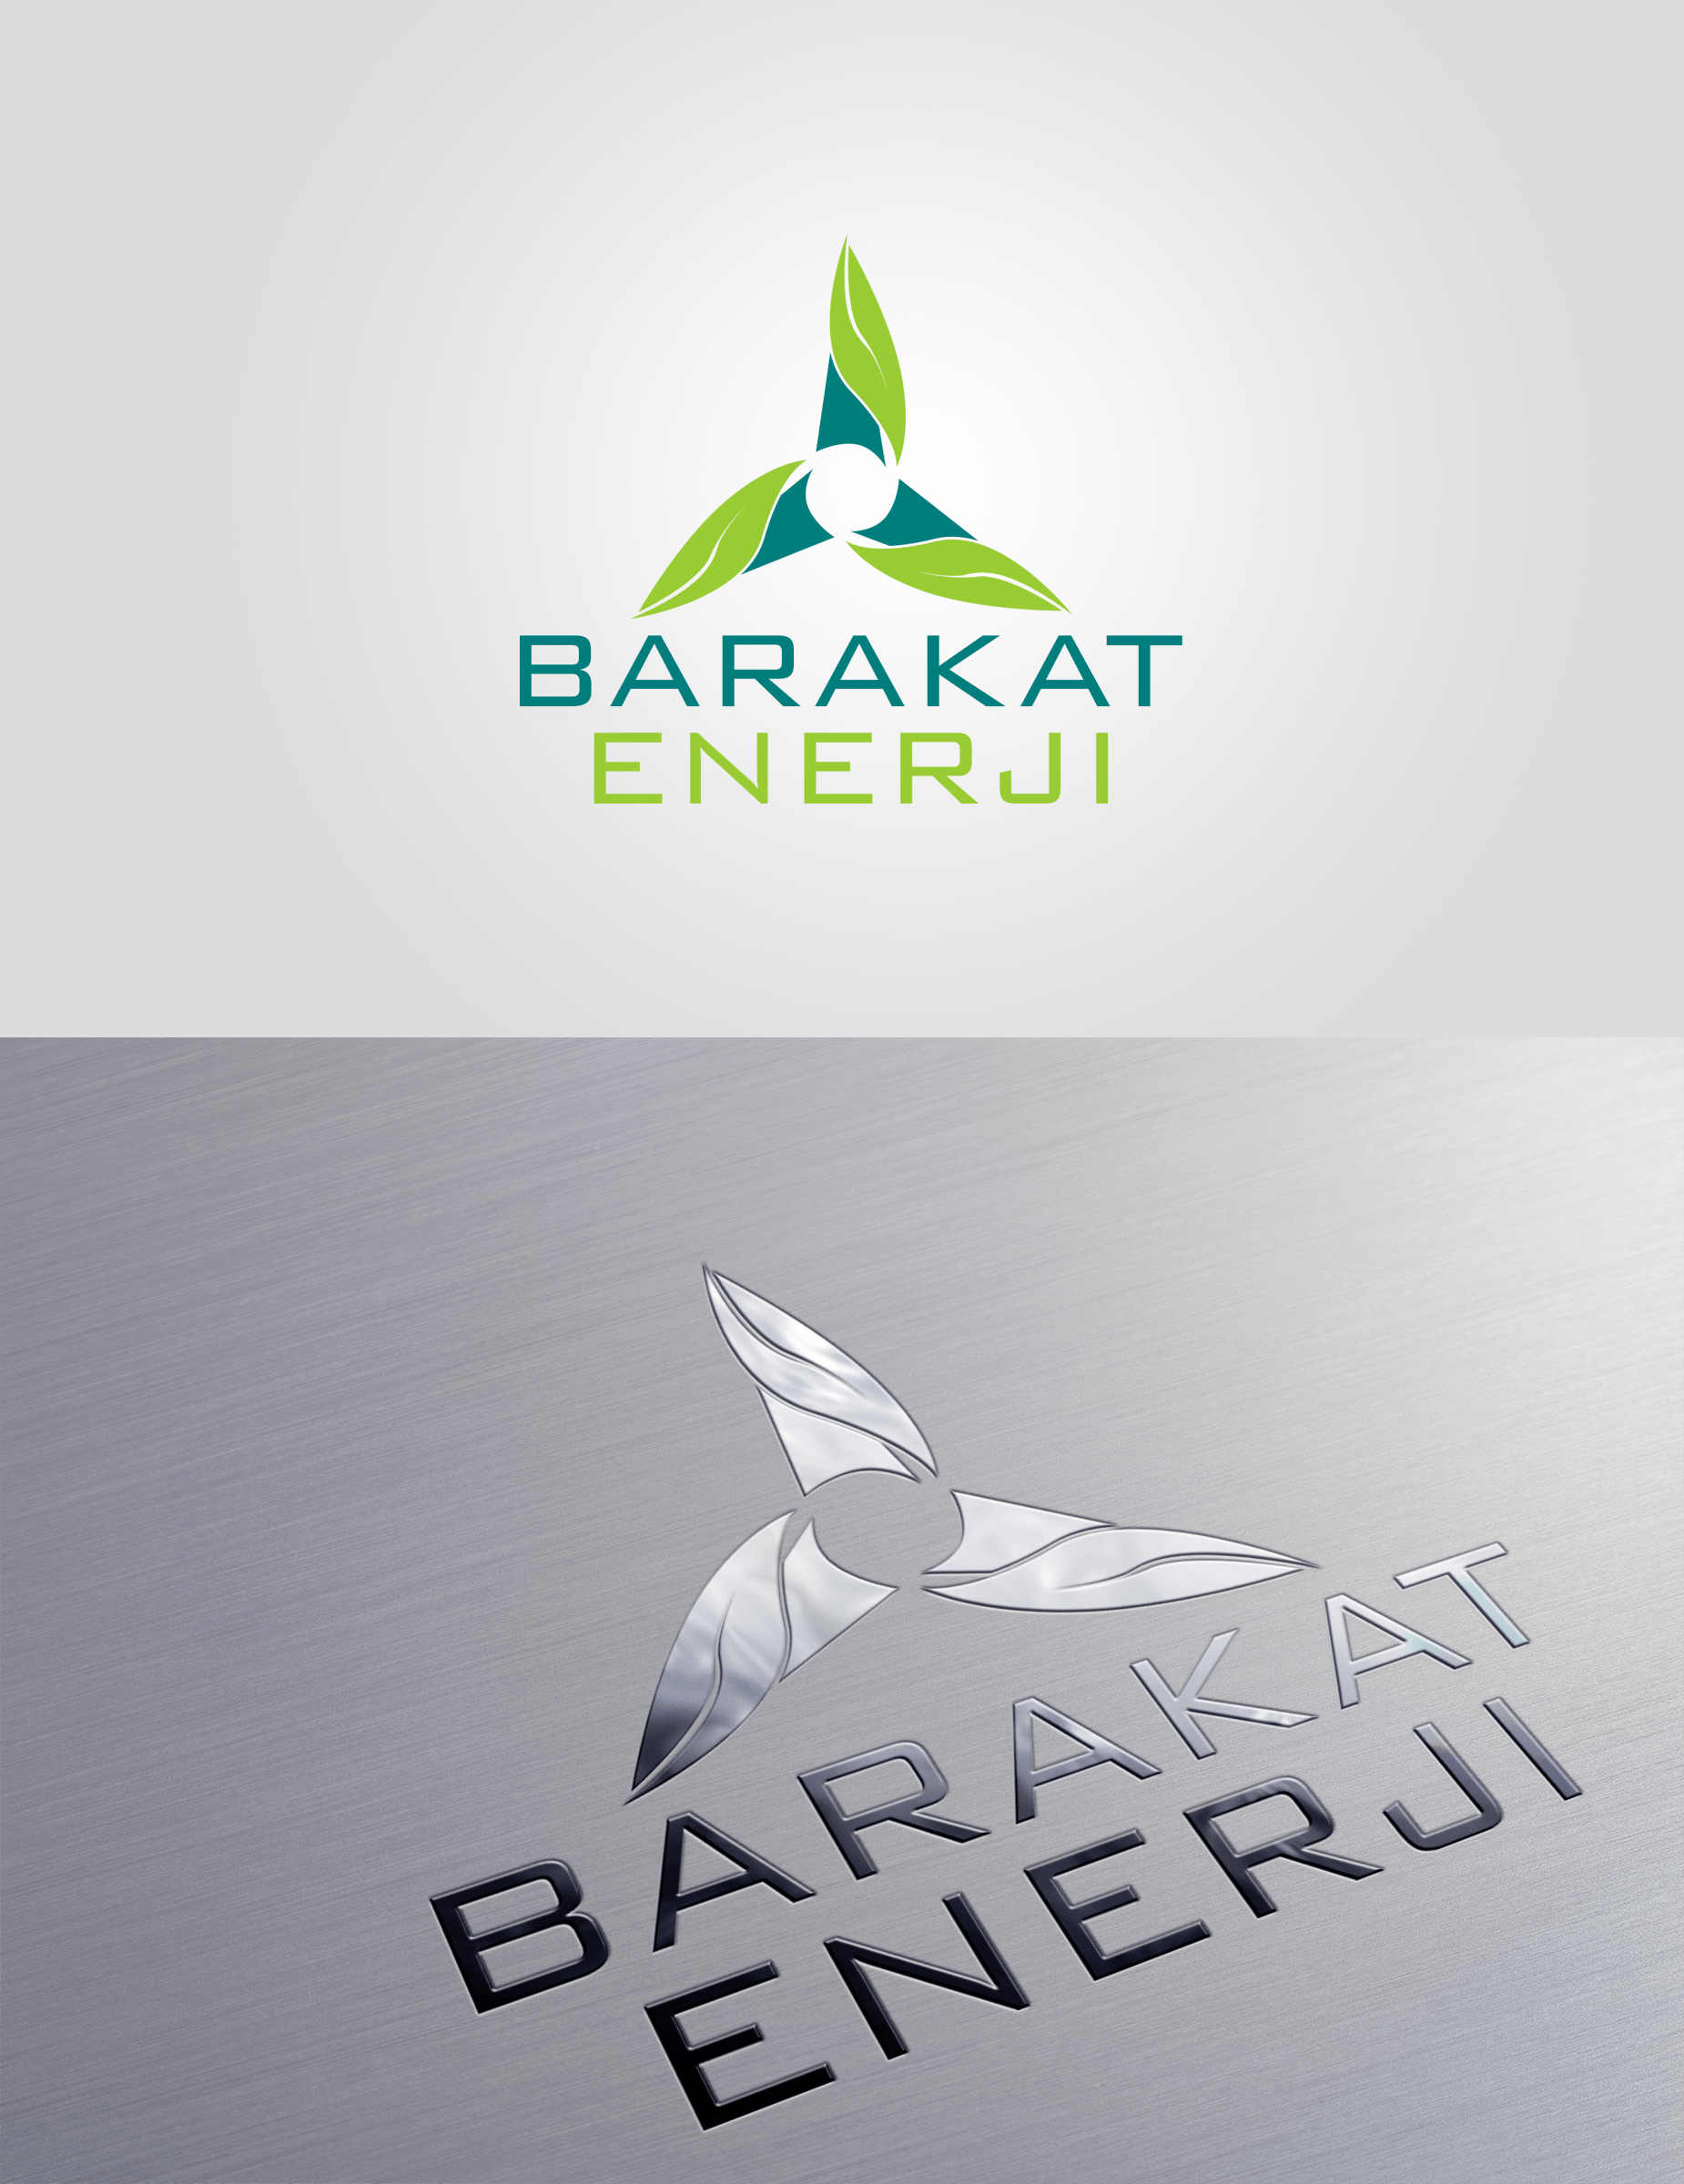 Energy Company Logo - Energy Company Logo Design. Order your Design today from our UK